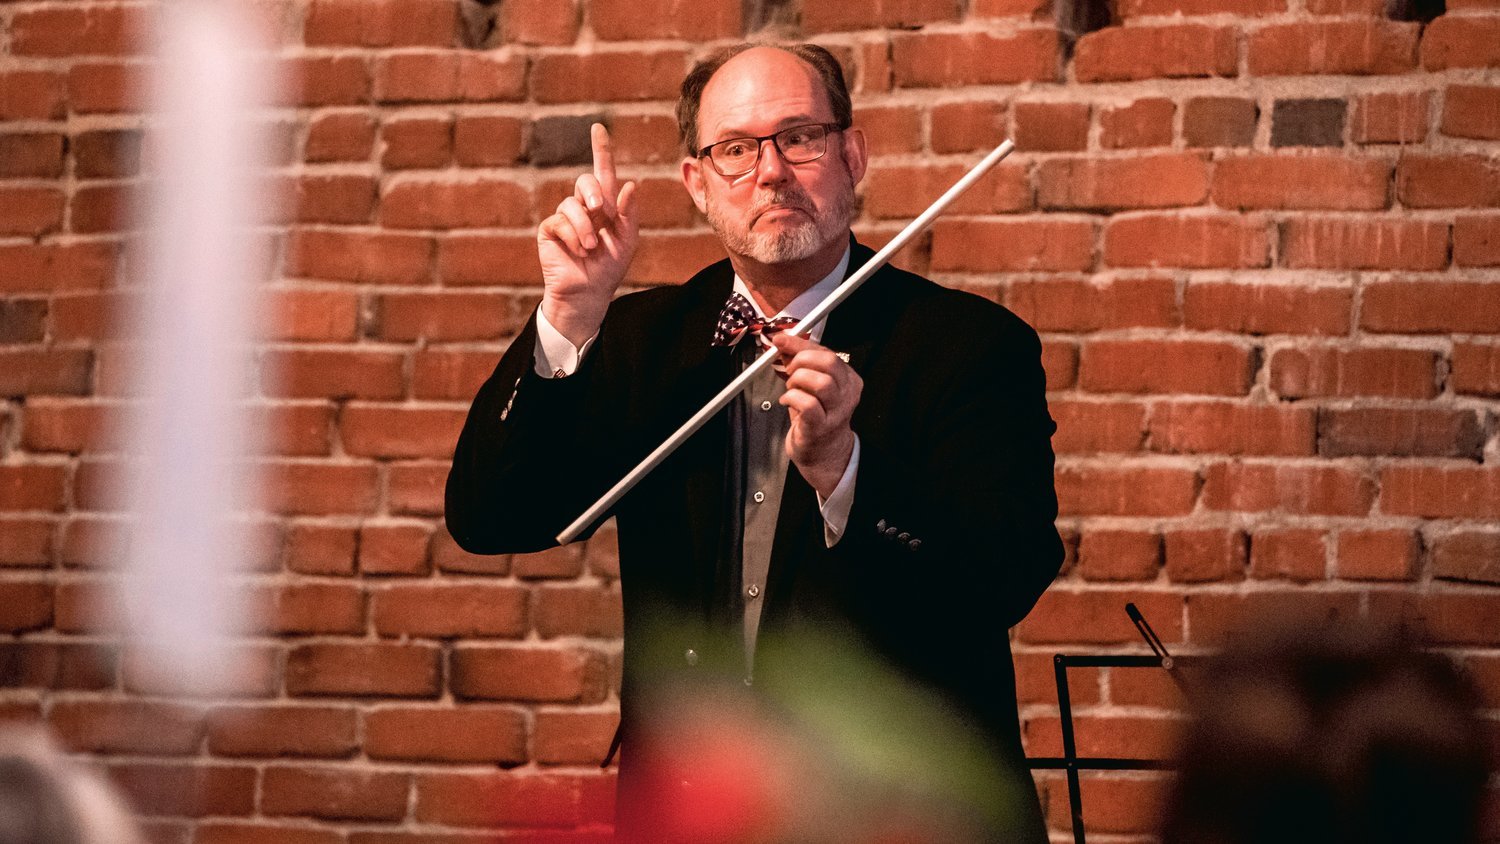 Dr. Douglas Frank uses an aluminum pipe as part of a demonstration while speaking to attendees of the Lincoln Day Dinner at The Loft in Chehalis.